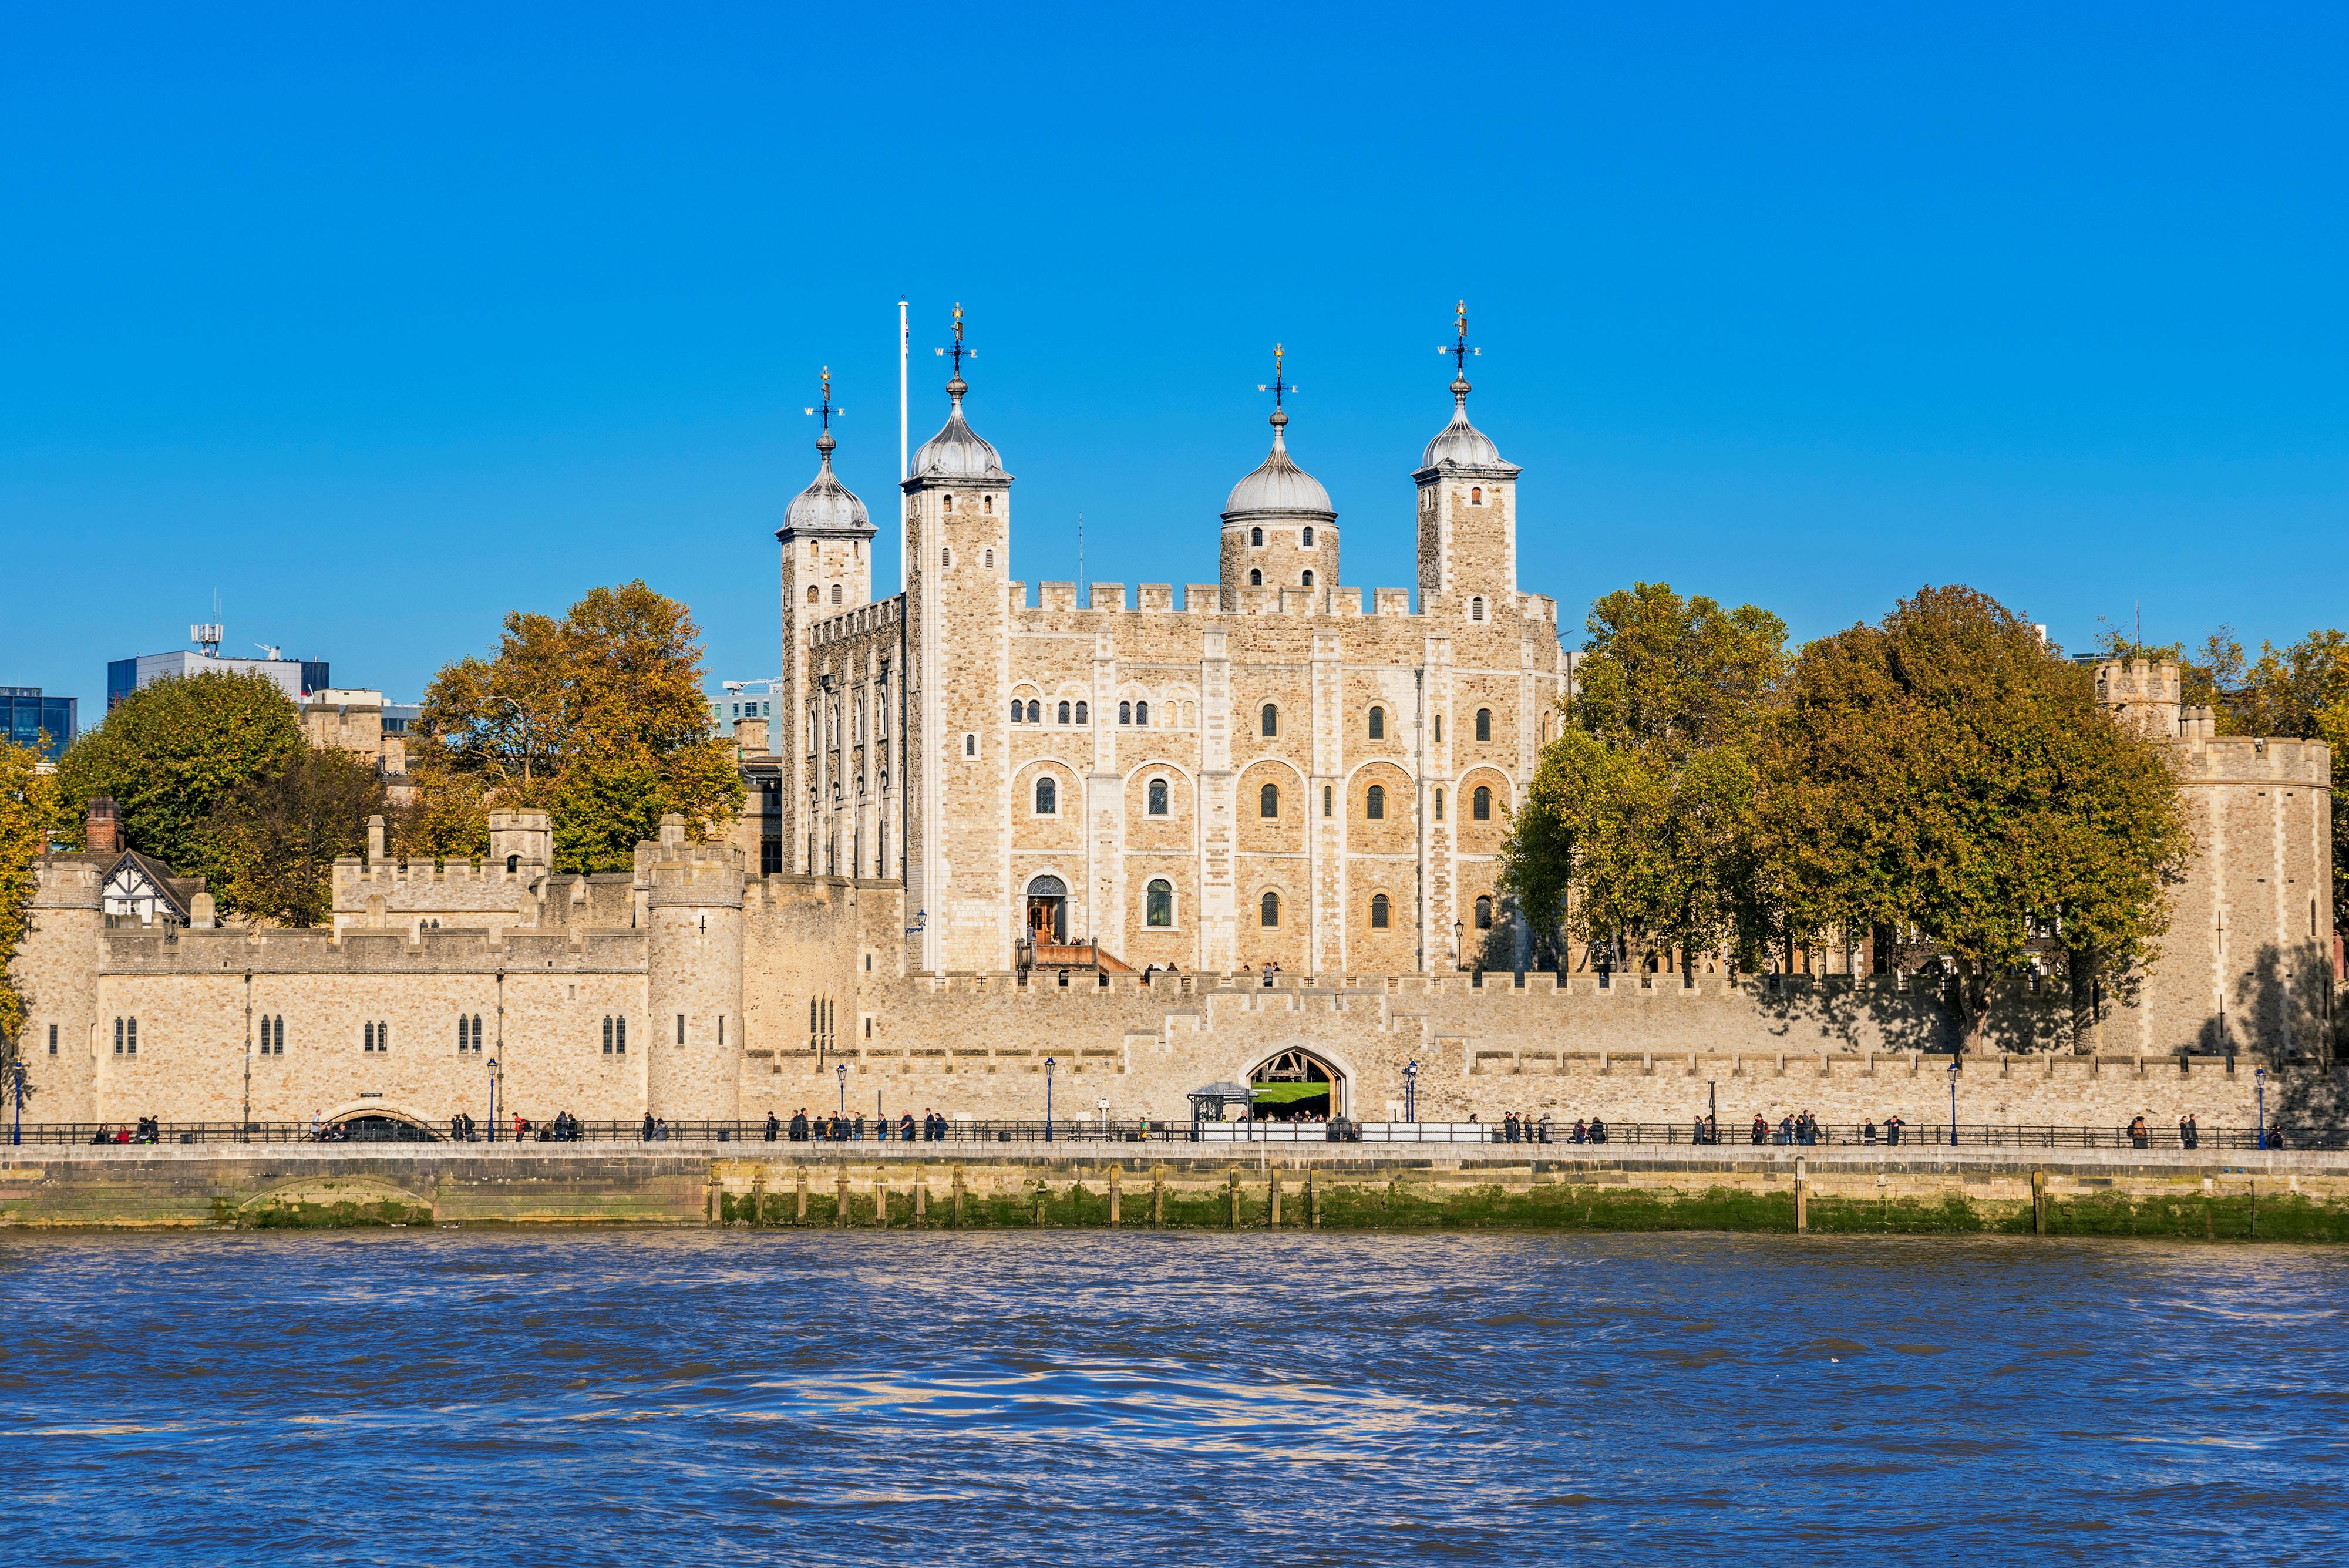 Tower of London, Thames River Ride & Changing of the Guards